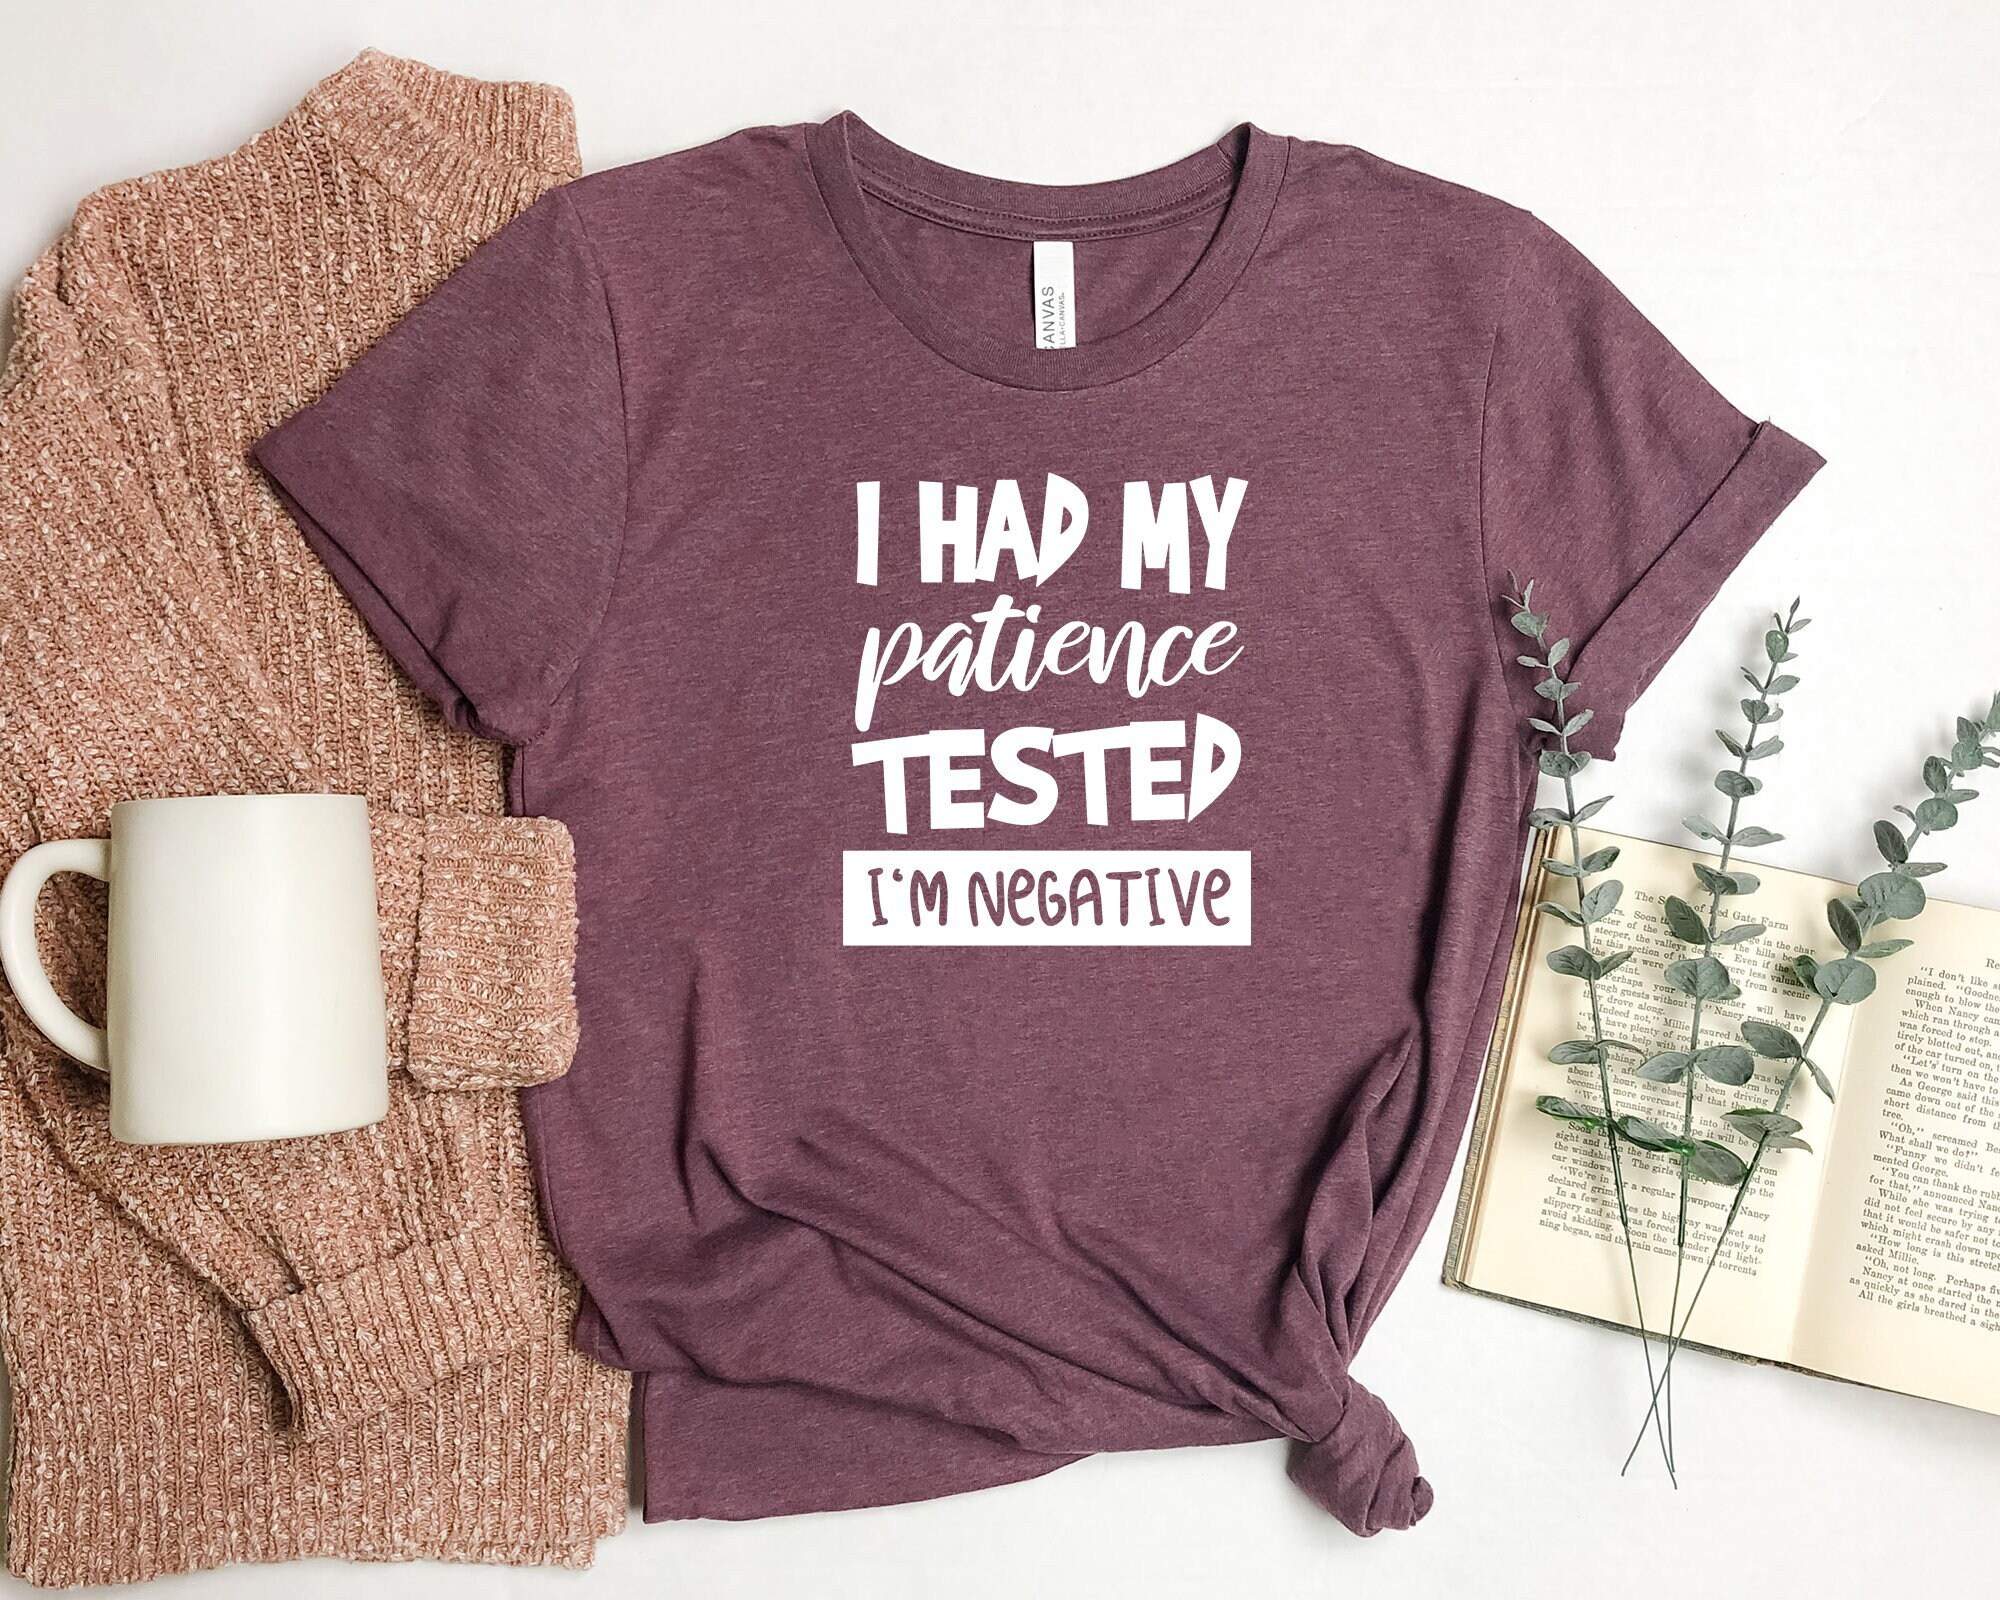 My Patience is Tested I'm Negative Shirt Funny Sarcastic Shirt Sarcasm tshirt Funny Unisex Shirt for Women